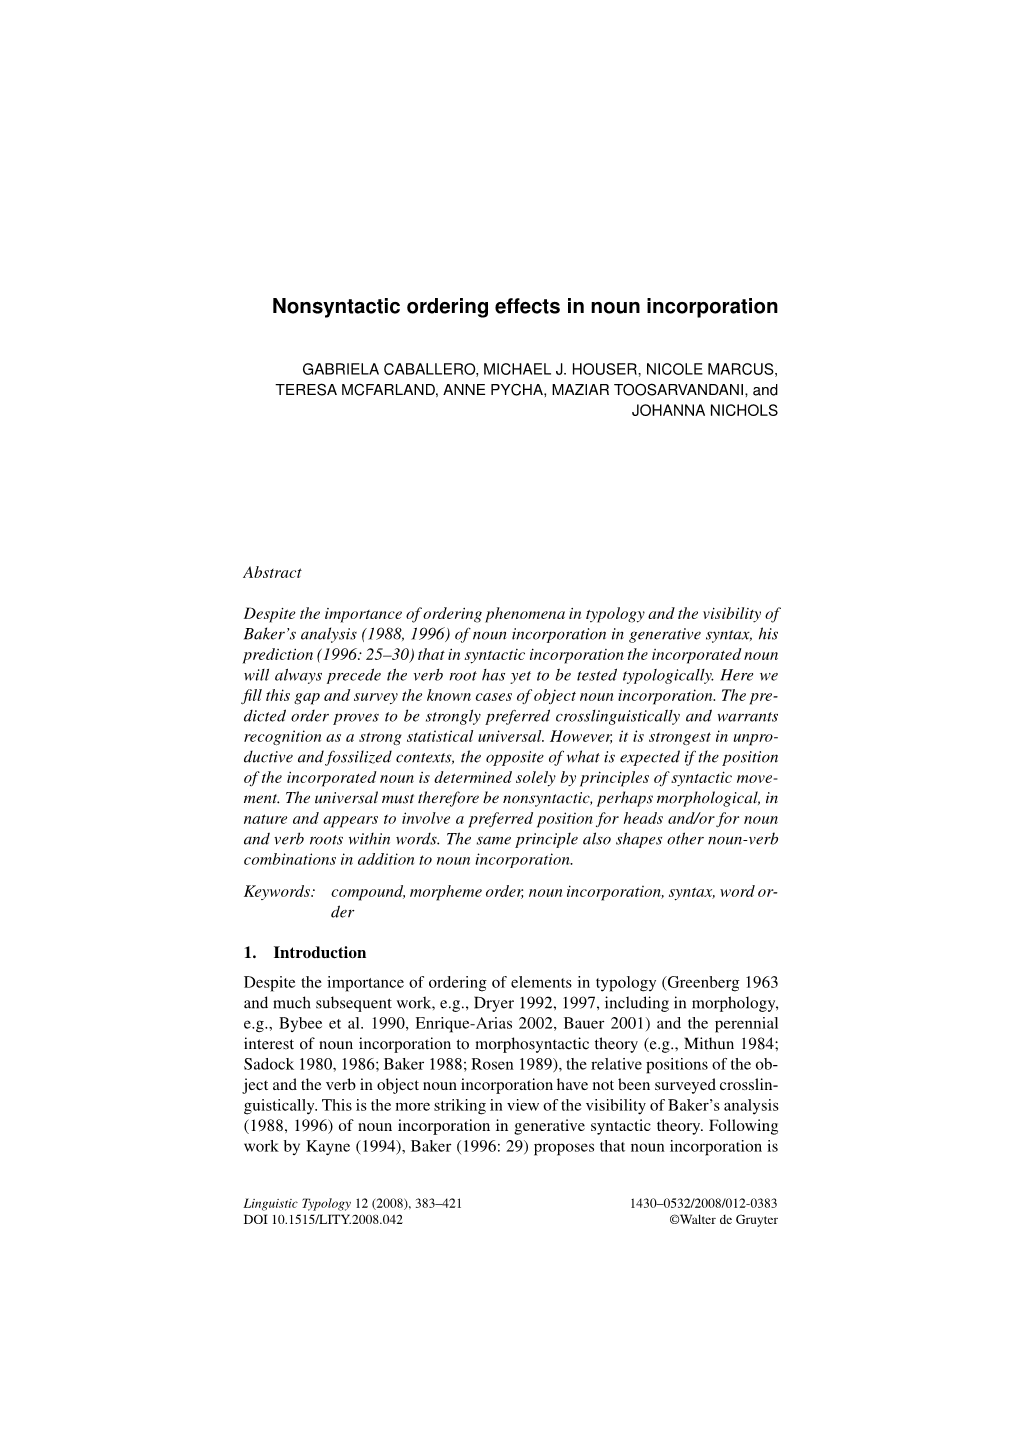 Nonsyntactic Ordering Effects in Noun Incorporation